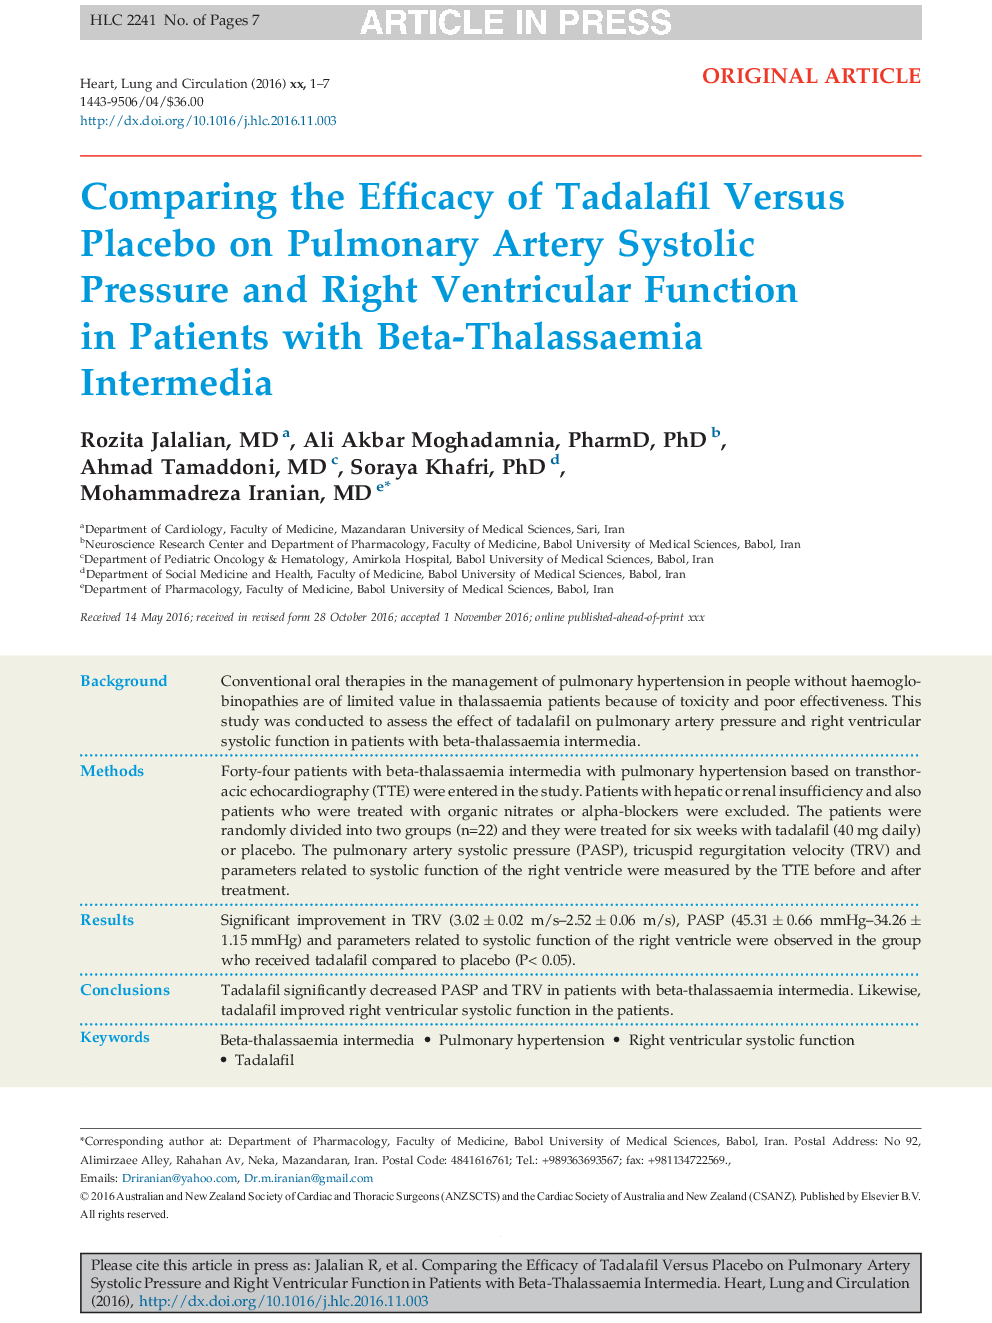 Comparing the Efficacy of Tadalafil Versus Placebo on Pulmonary Artery Systolic Pressure and Right Ventricular Function in Patients with Beta-Thalassaemia Intermedia